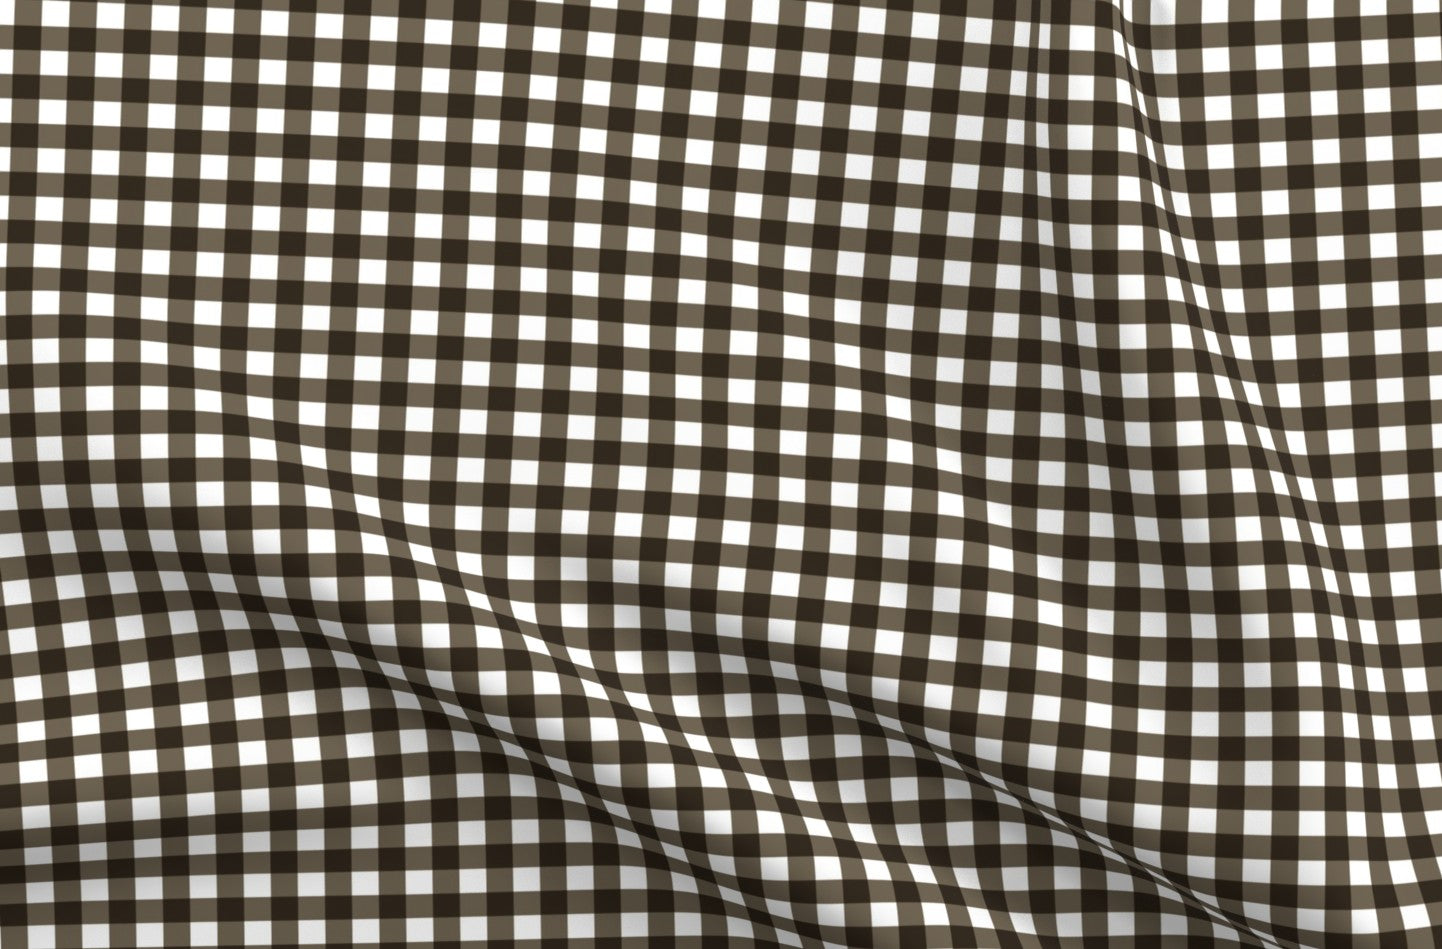 Gingham Style Bark Large Straight Printed Fabric by Studio Ten Design